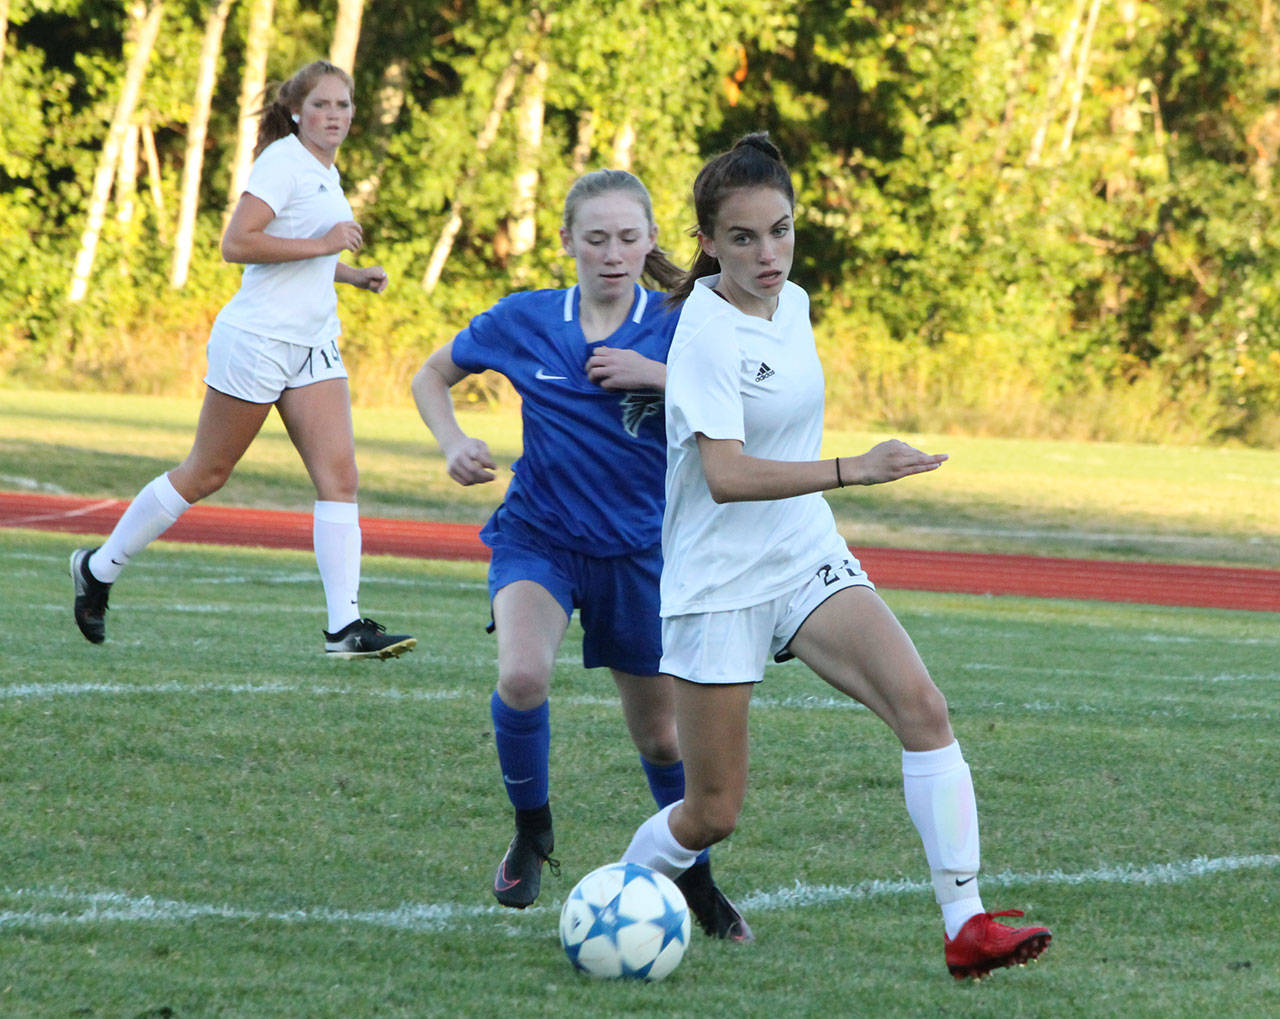 Mallory Kortuem beats a South Whidbey player to the ball.(Photo by Jim Waller/Whidbey News-Times)